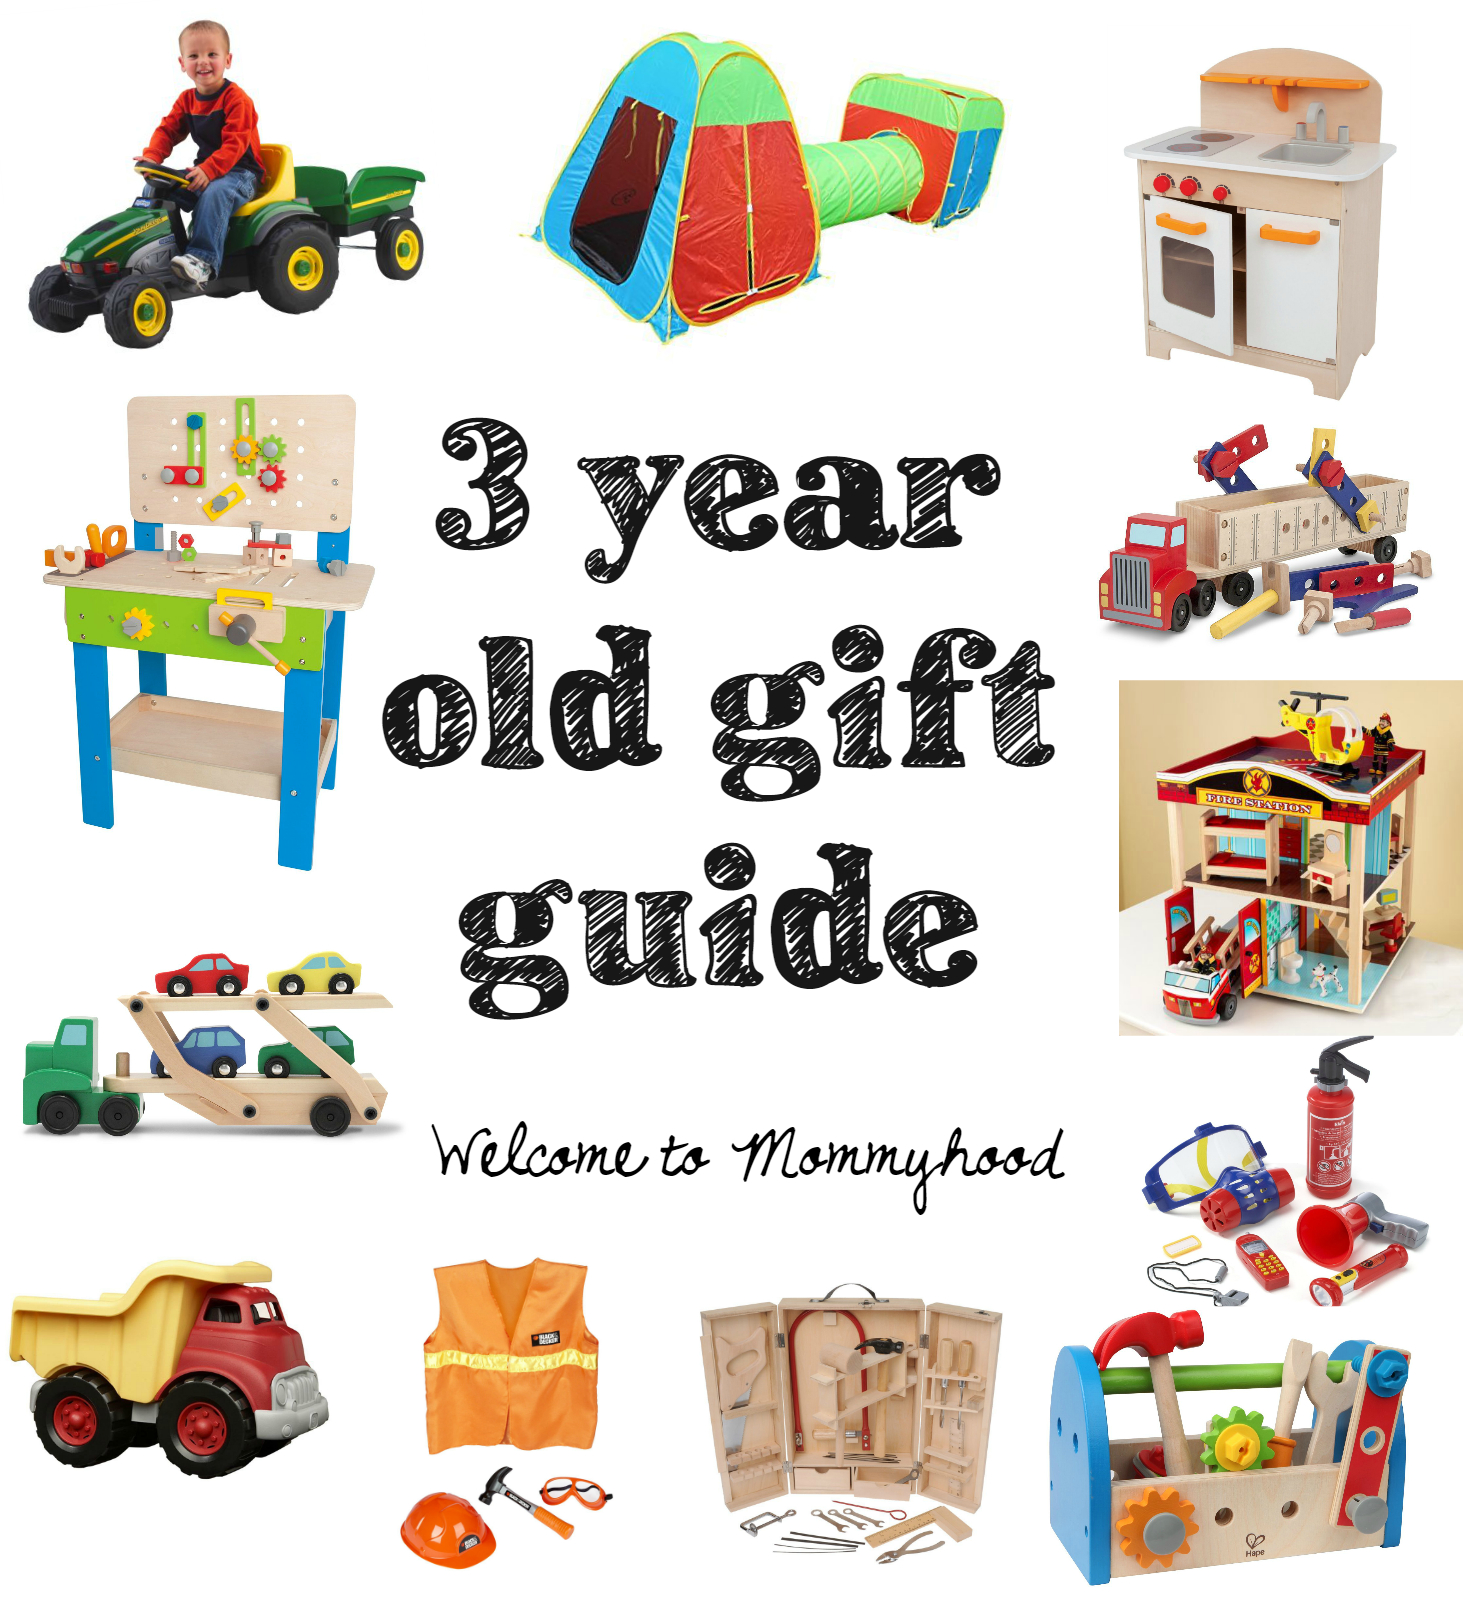 10 Most Recommended Gift Idea For 3 Year Old Girl birthday gift ideas for a 3 year old xmas and bday gift 3 year 1 2022